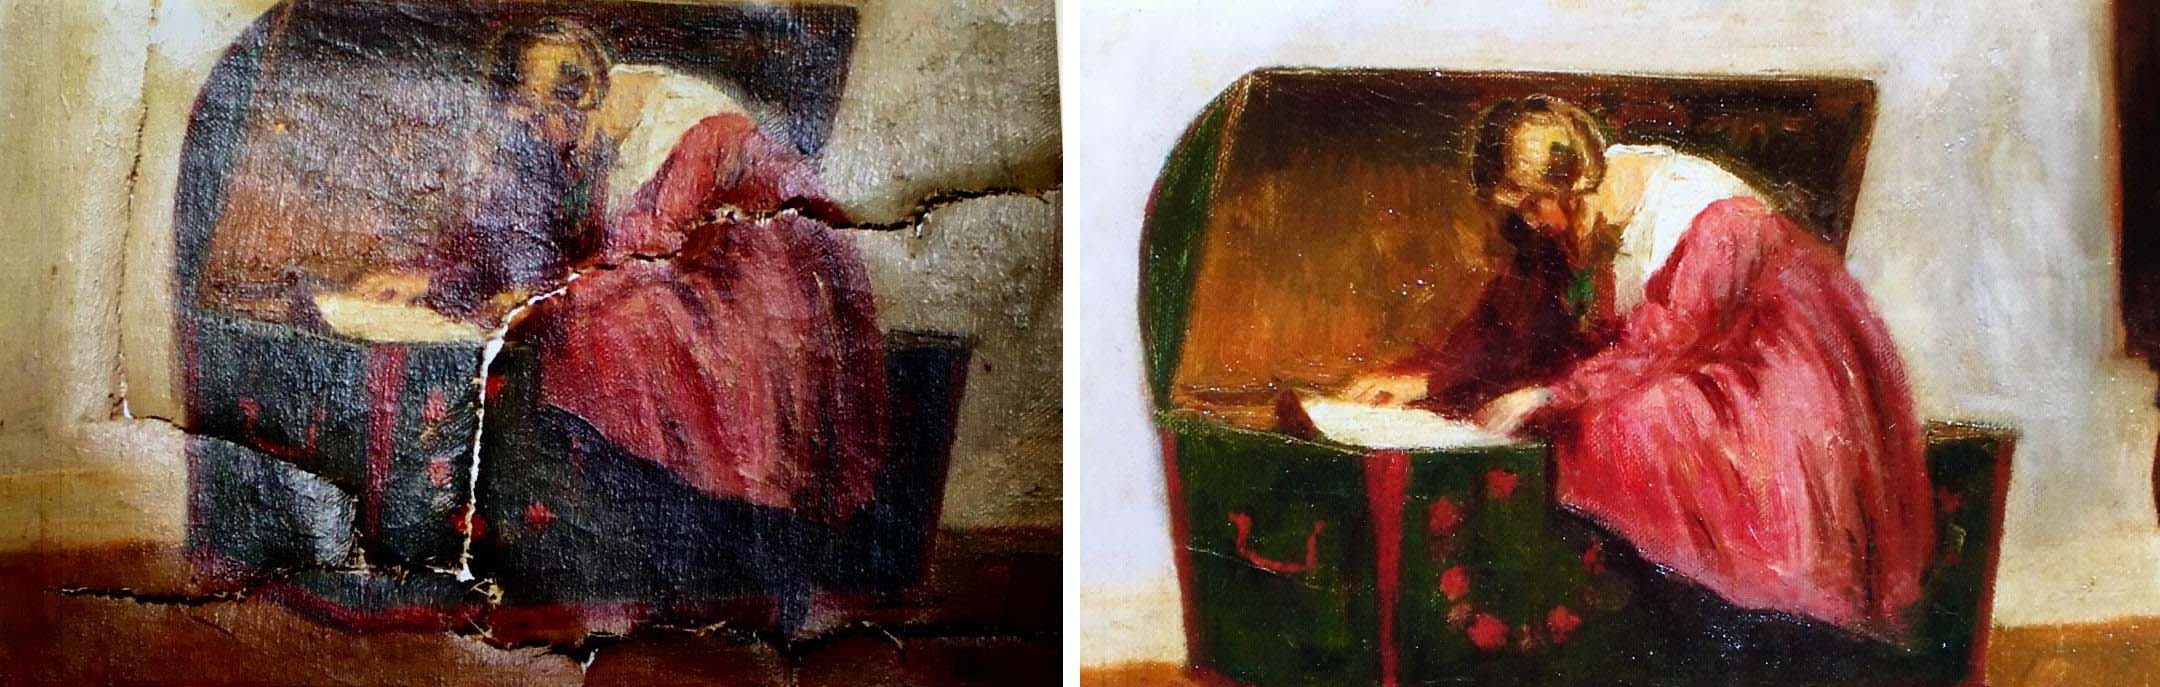 A painting of a person in a red dress and an old green chest.